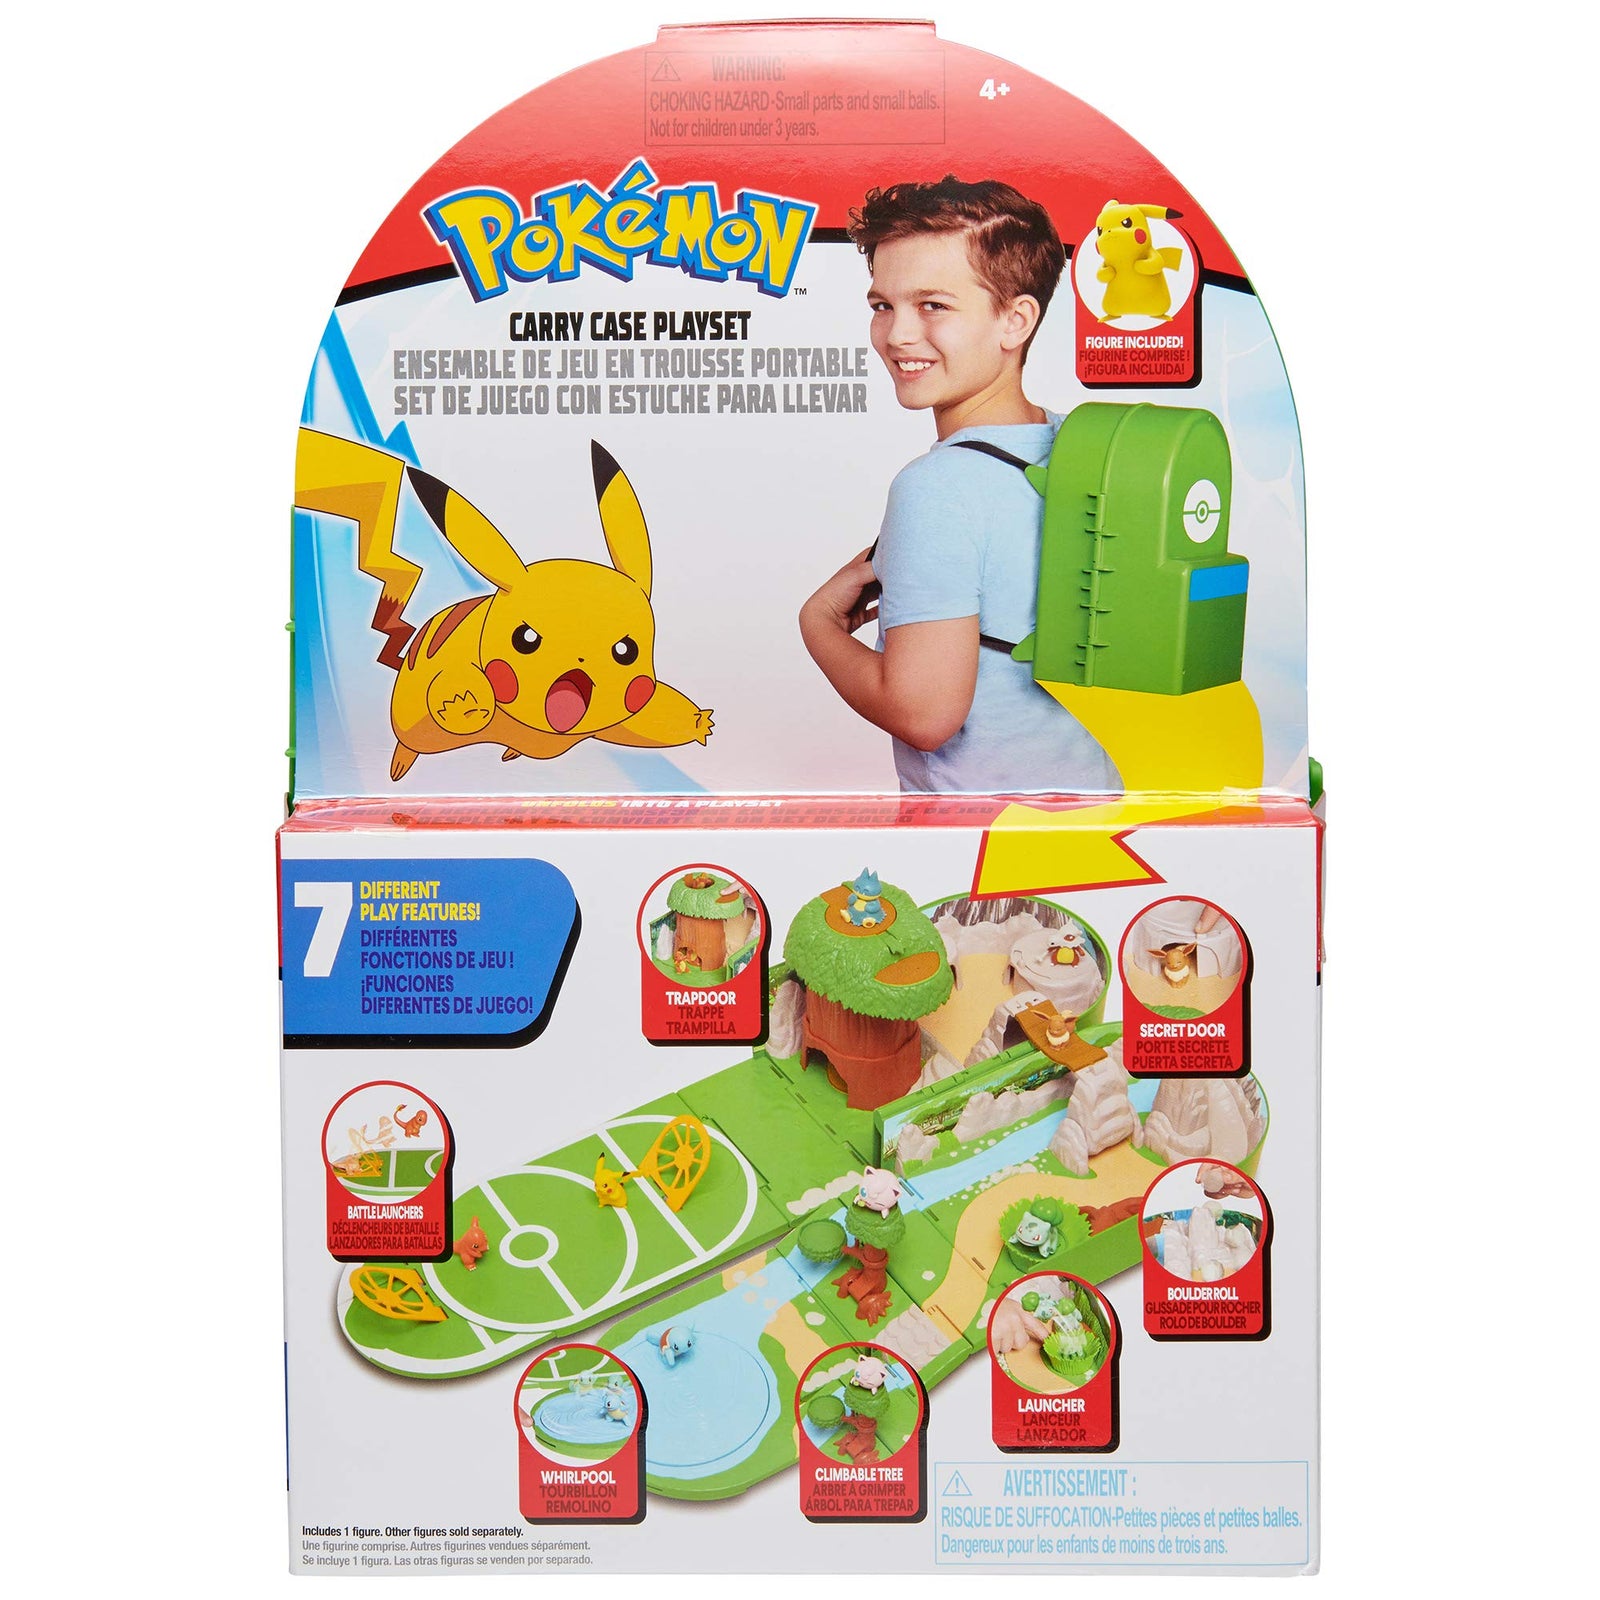 Pokemon Carry Case Playset, Feat. Different Locations Within One Playset, with 2-Inch Pikachu Figure, Treetop Trap Door, Battle Area, Hidden Cave and More - Easily Folds into a Backpack